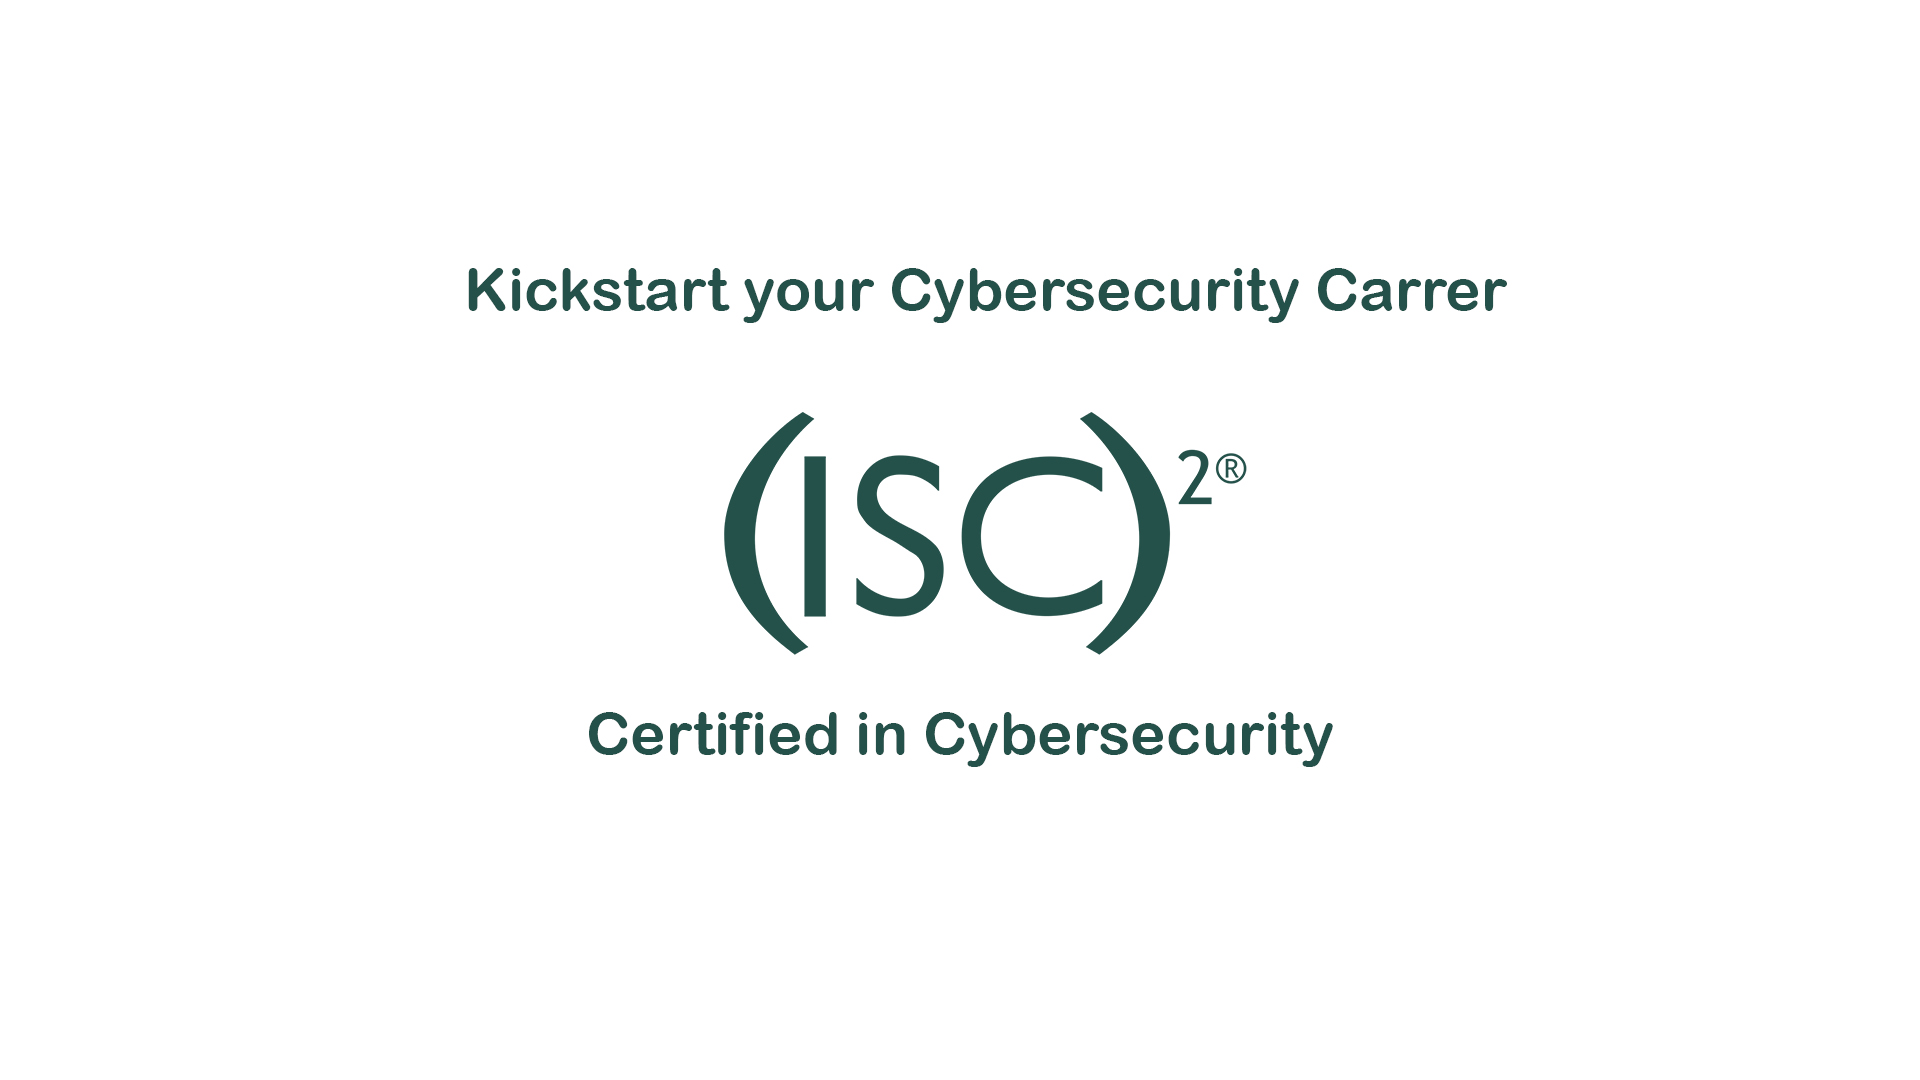 Kickstart your Cybersecurity Career with ISC² Certified in Cybersecurity